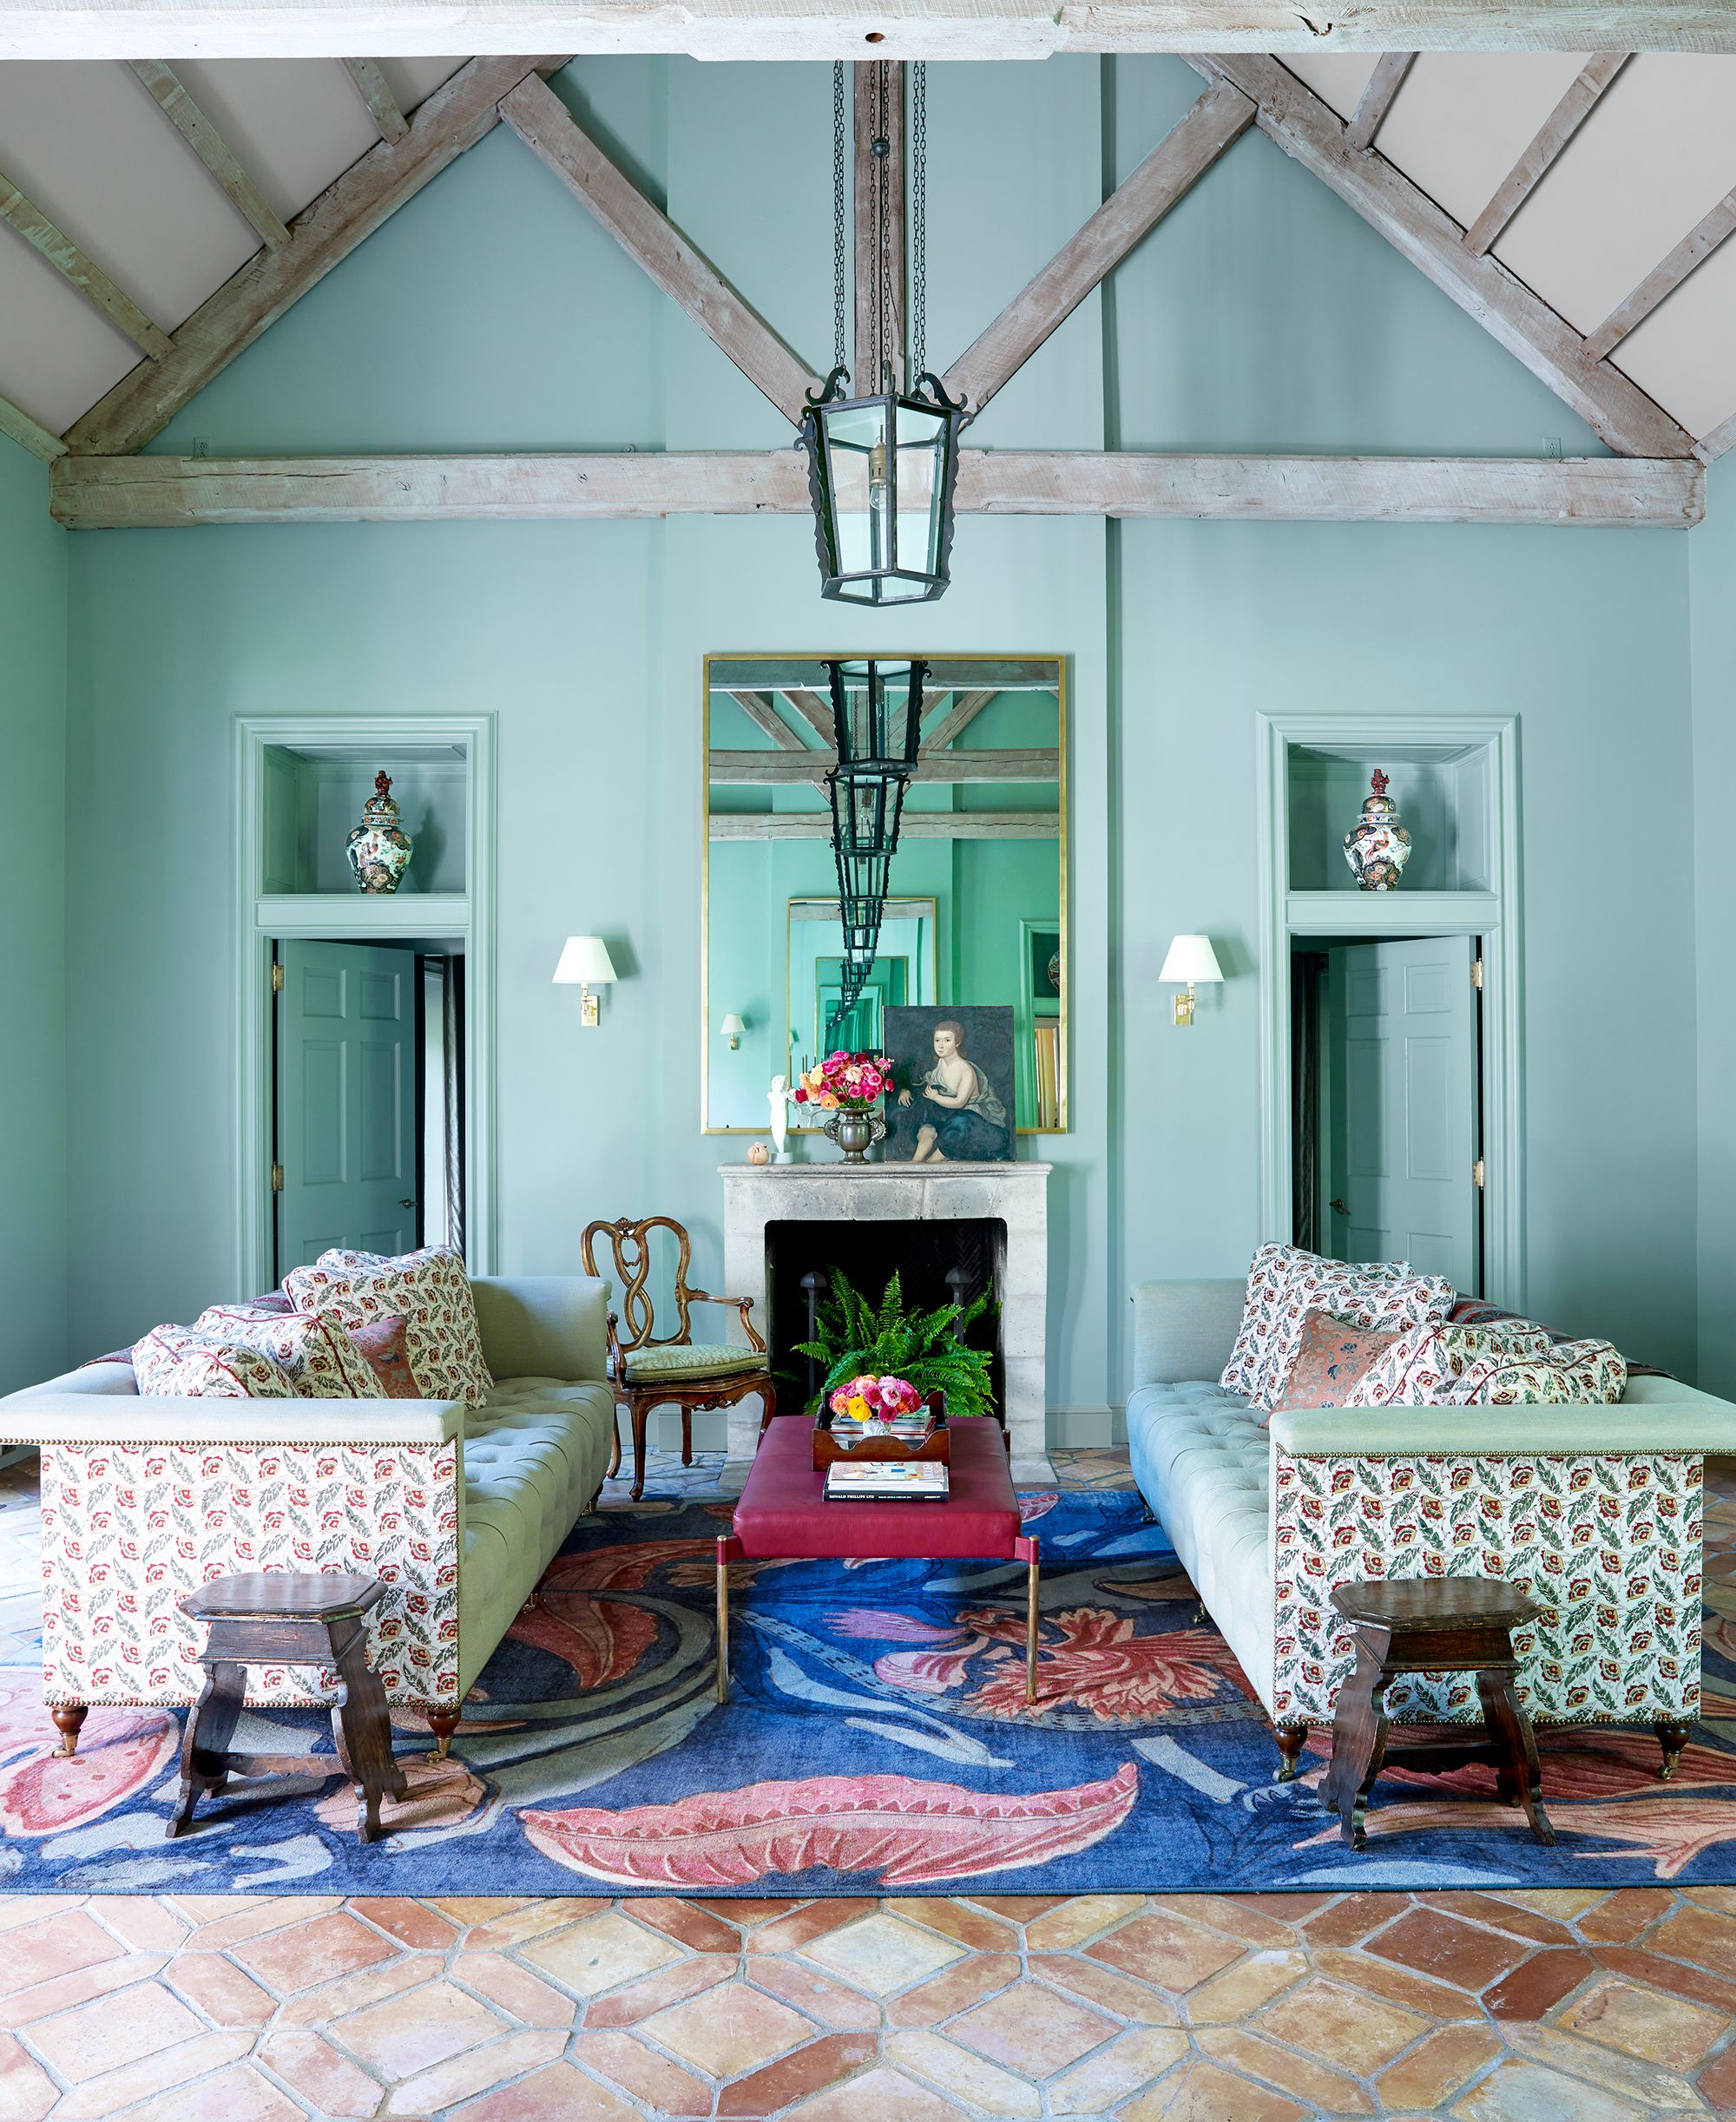 How to Decorate With Mint Green - 25 Colors to Pair With Mint Decor